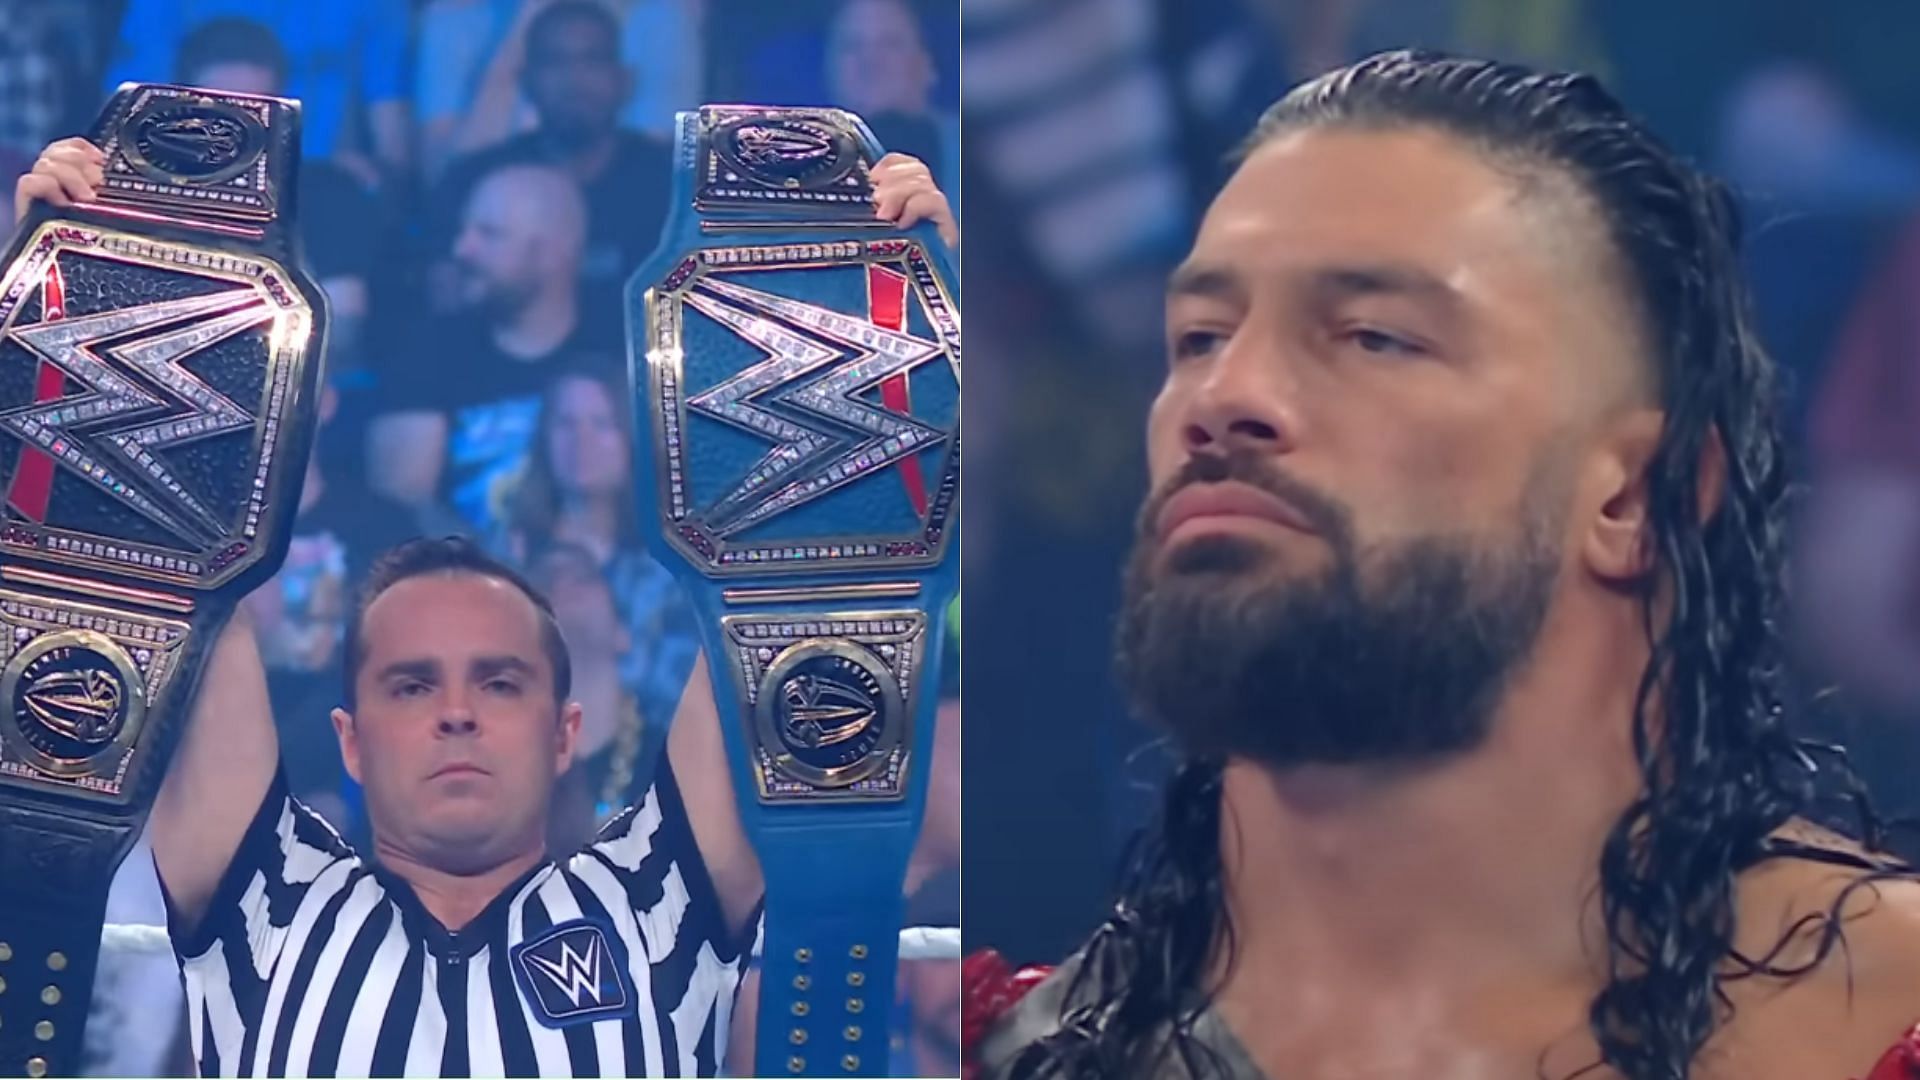 Roman Reigns is the Undisputed WWE Universal Champion.